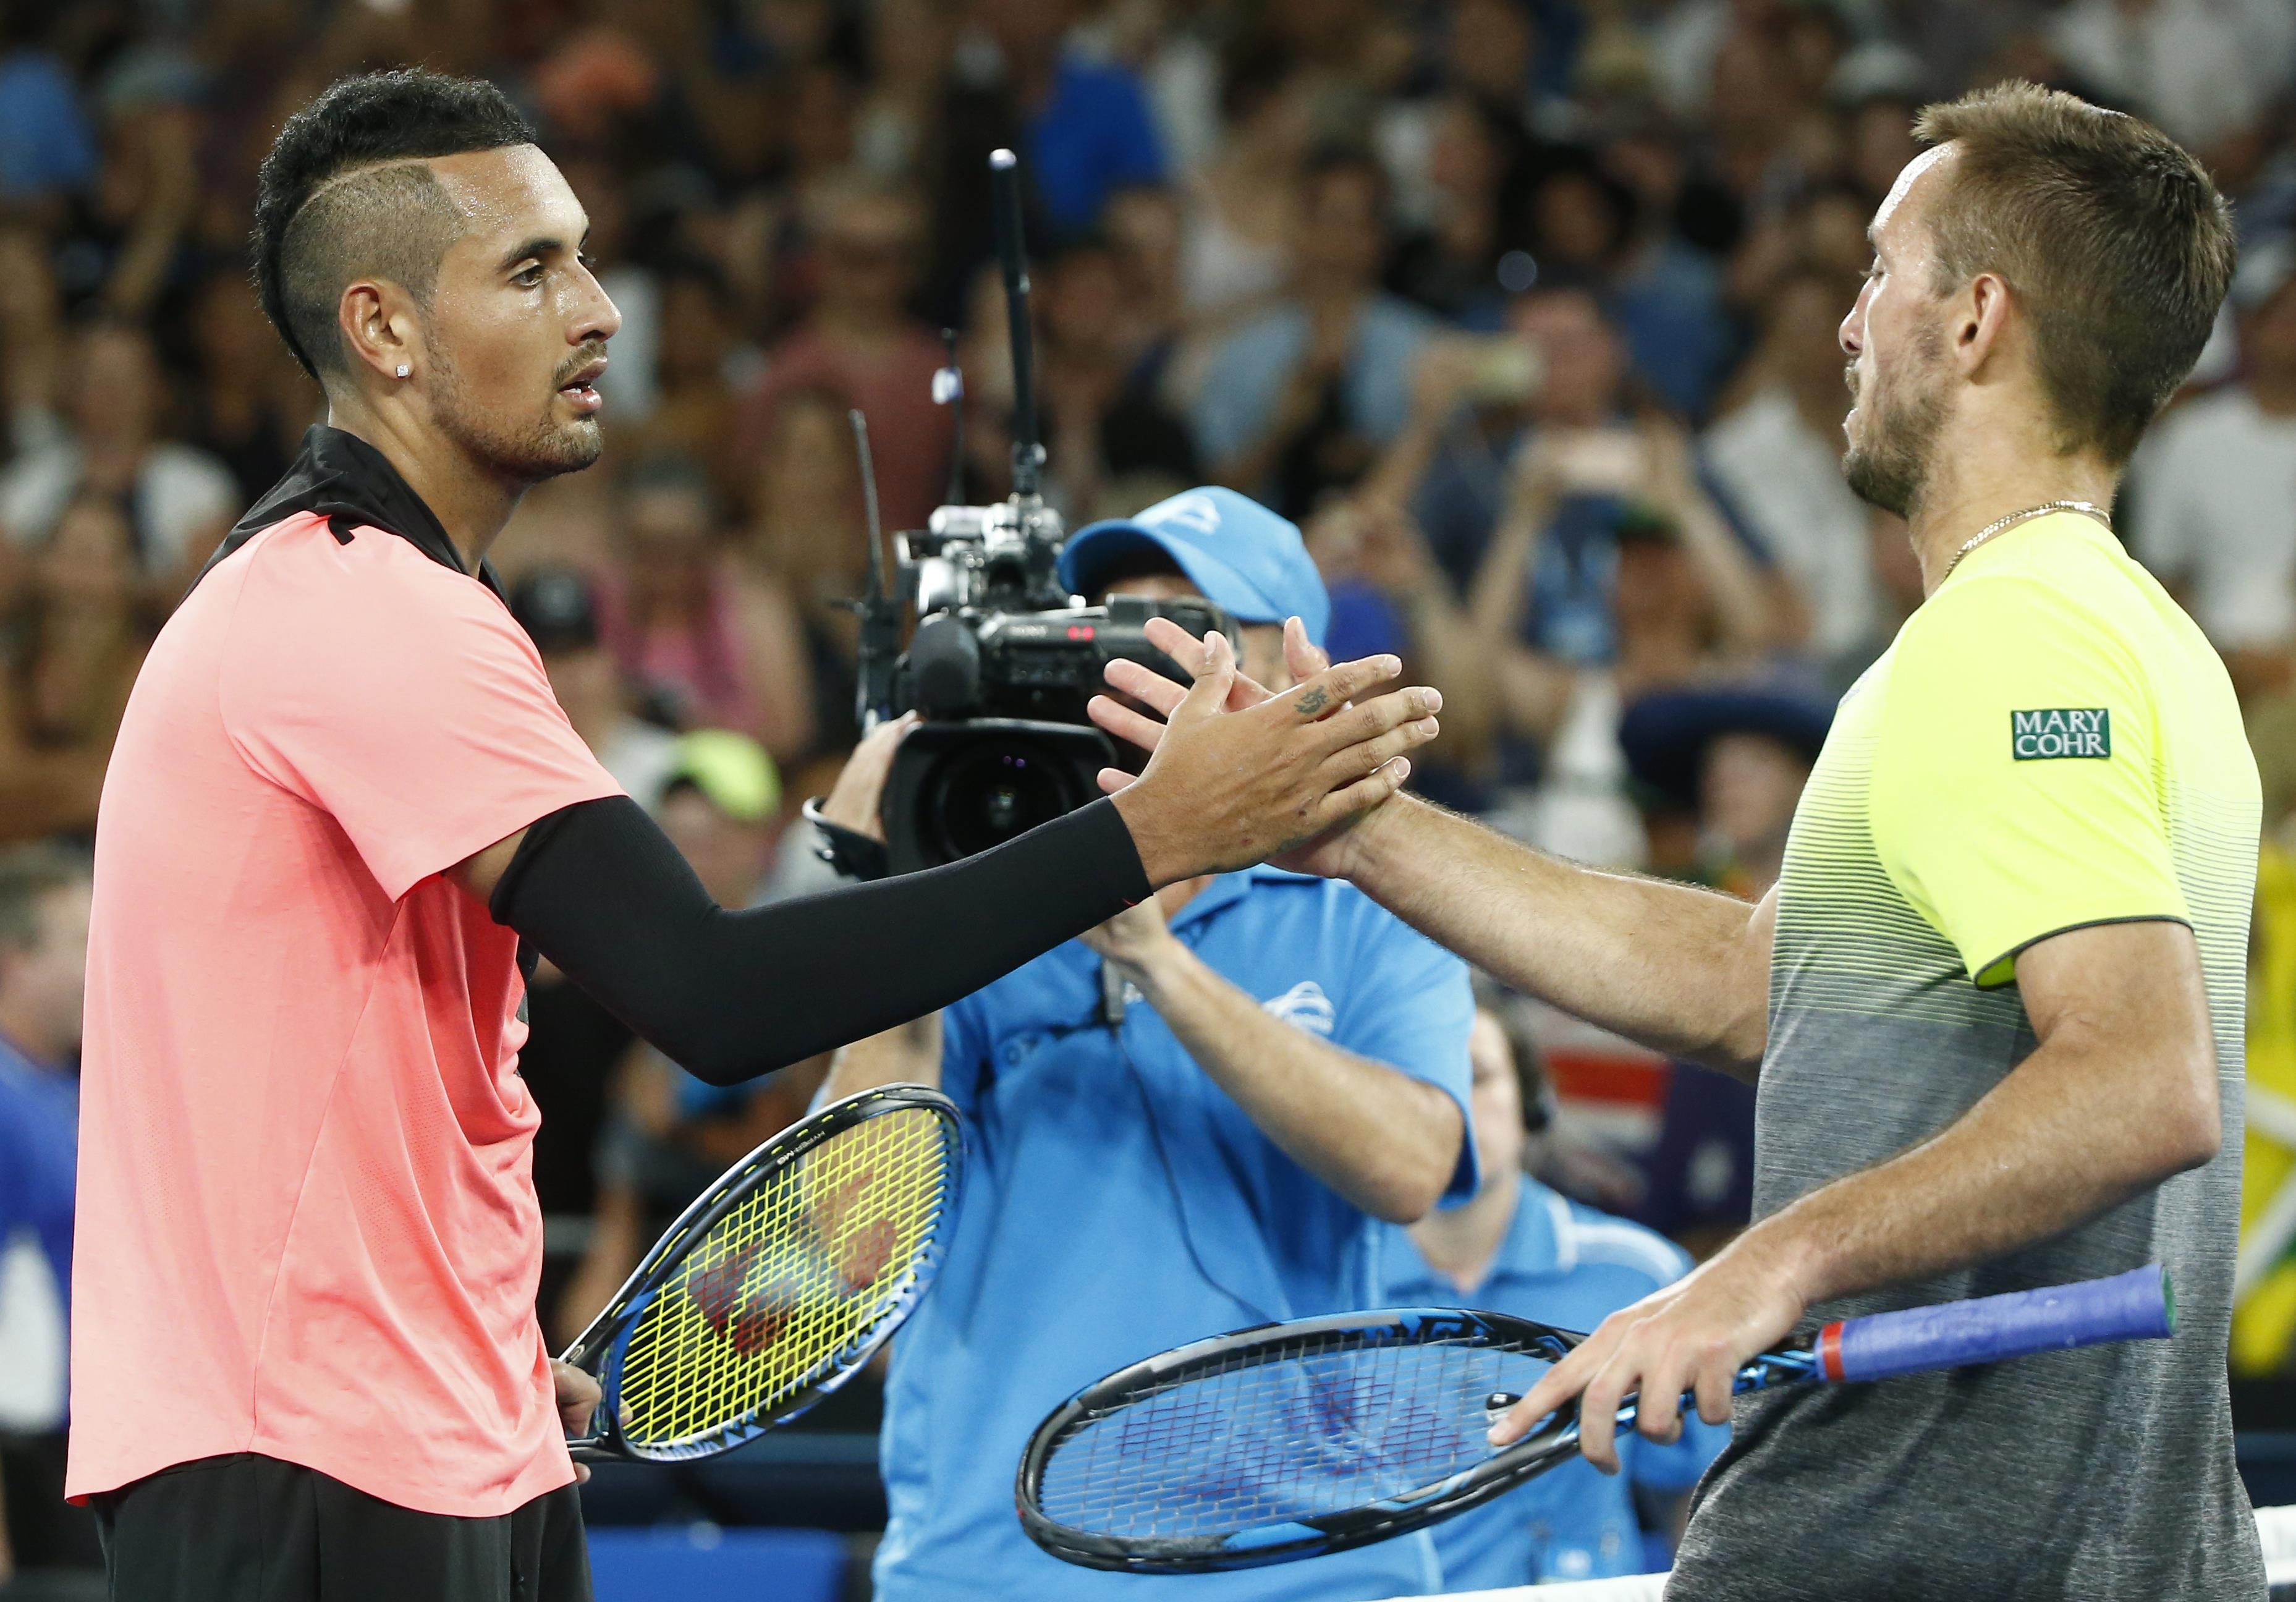 Tennis: Kyrgios keeps cool to storm into third round